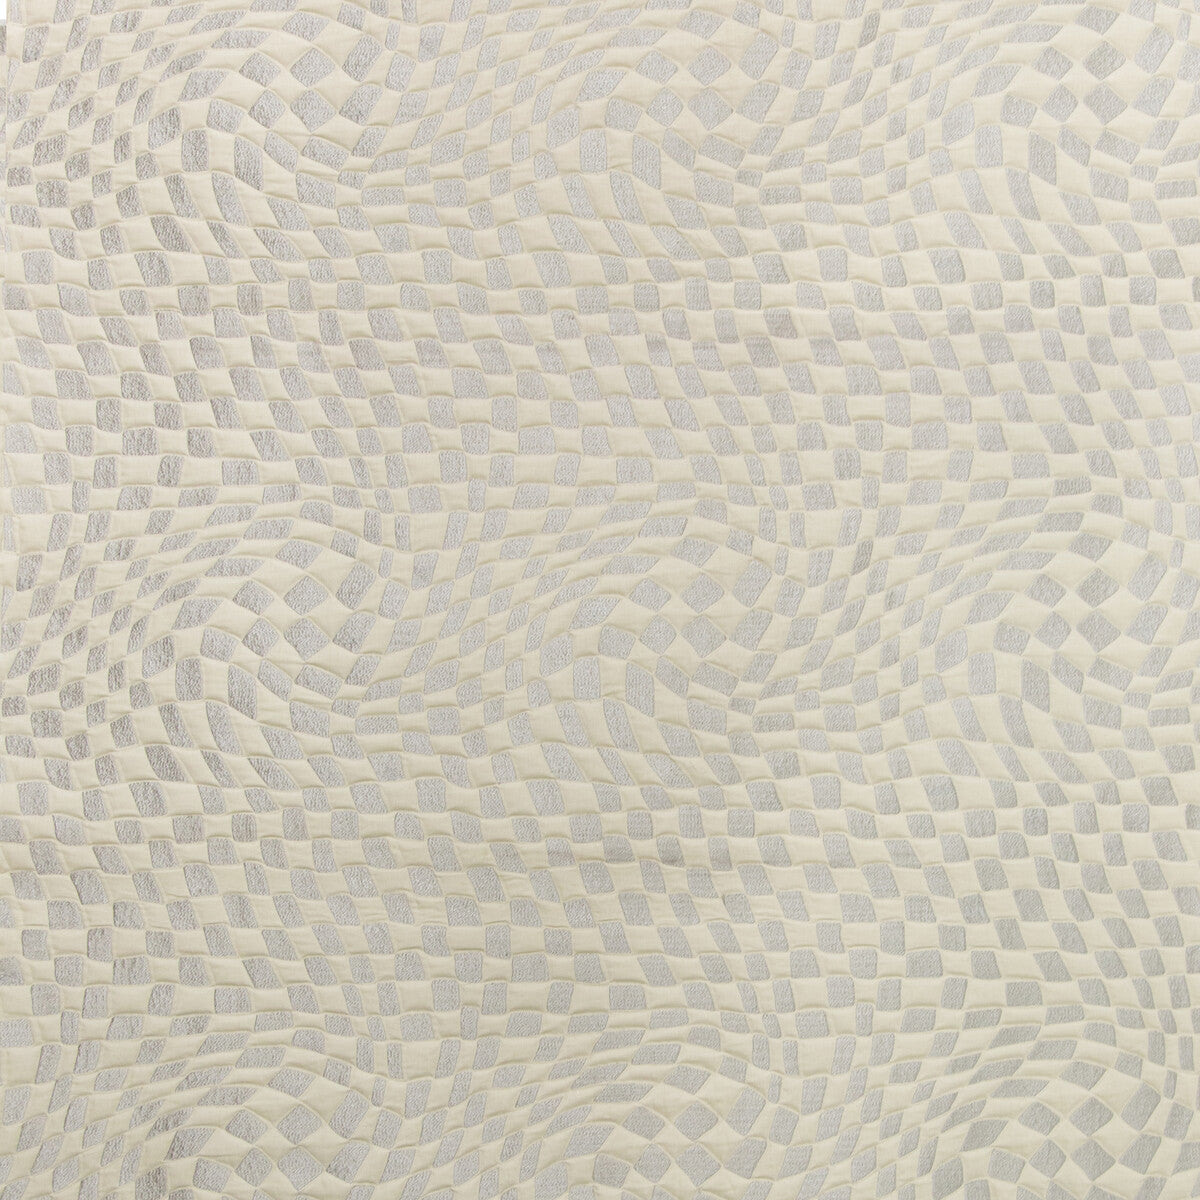 Ionic fabric in salt/silver color - pattern GWF-3725.111.0 - by Lee Jofa Modern in the Kelly Wearstler IV collection